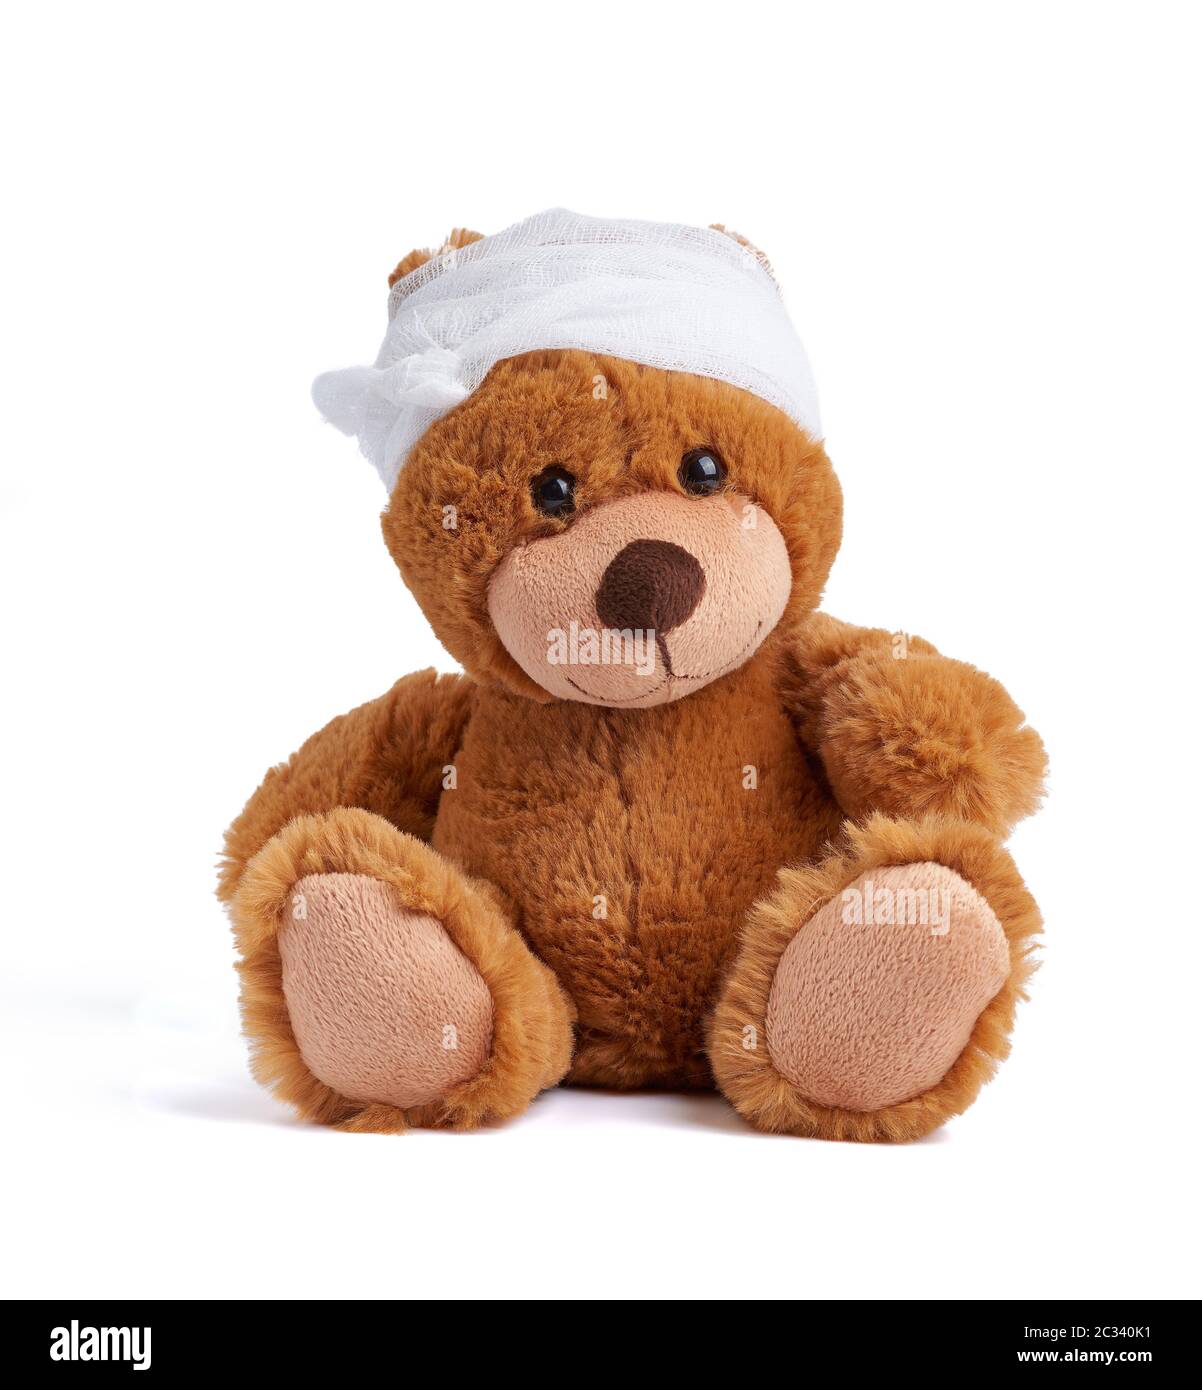 brown teddy bear with a bandaged head in a white medical bandage on a white background, concept of child trauma, headache Stock Photo